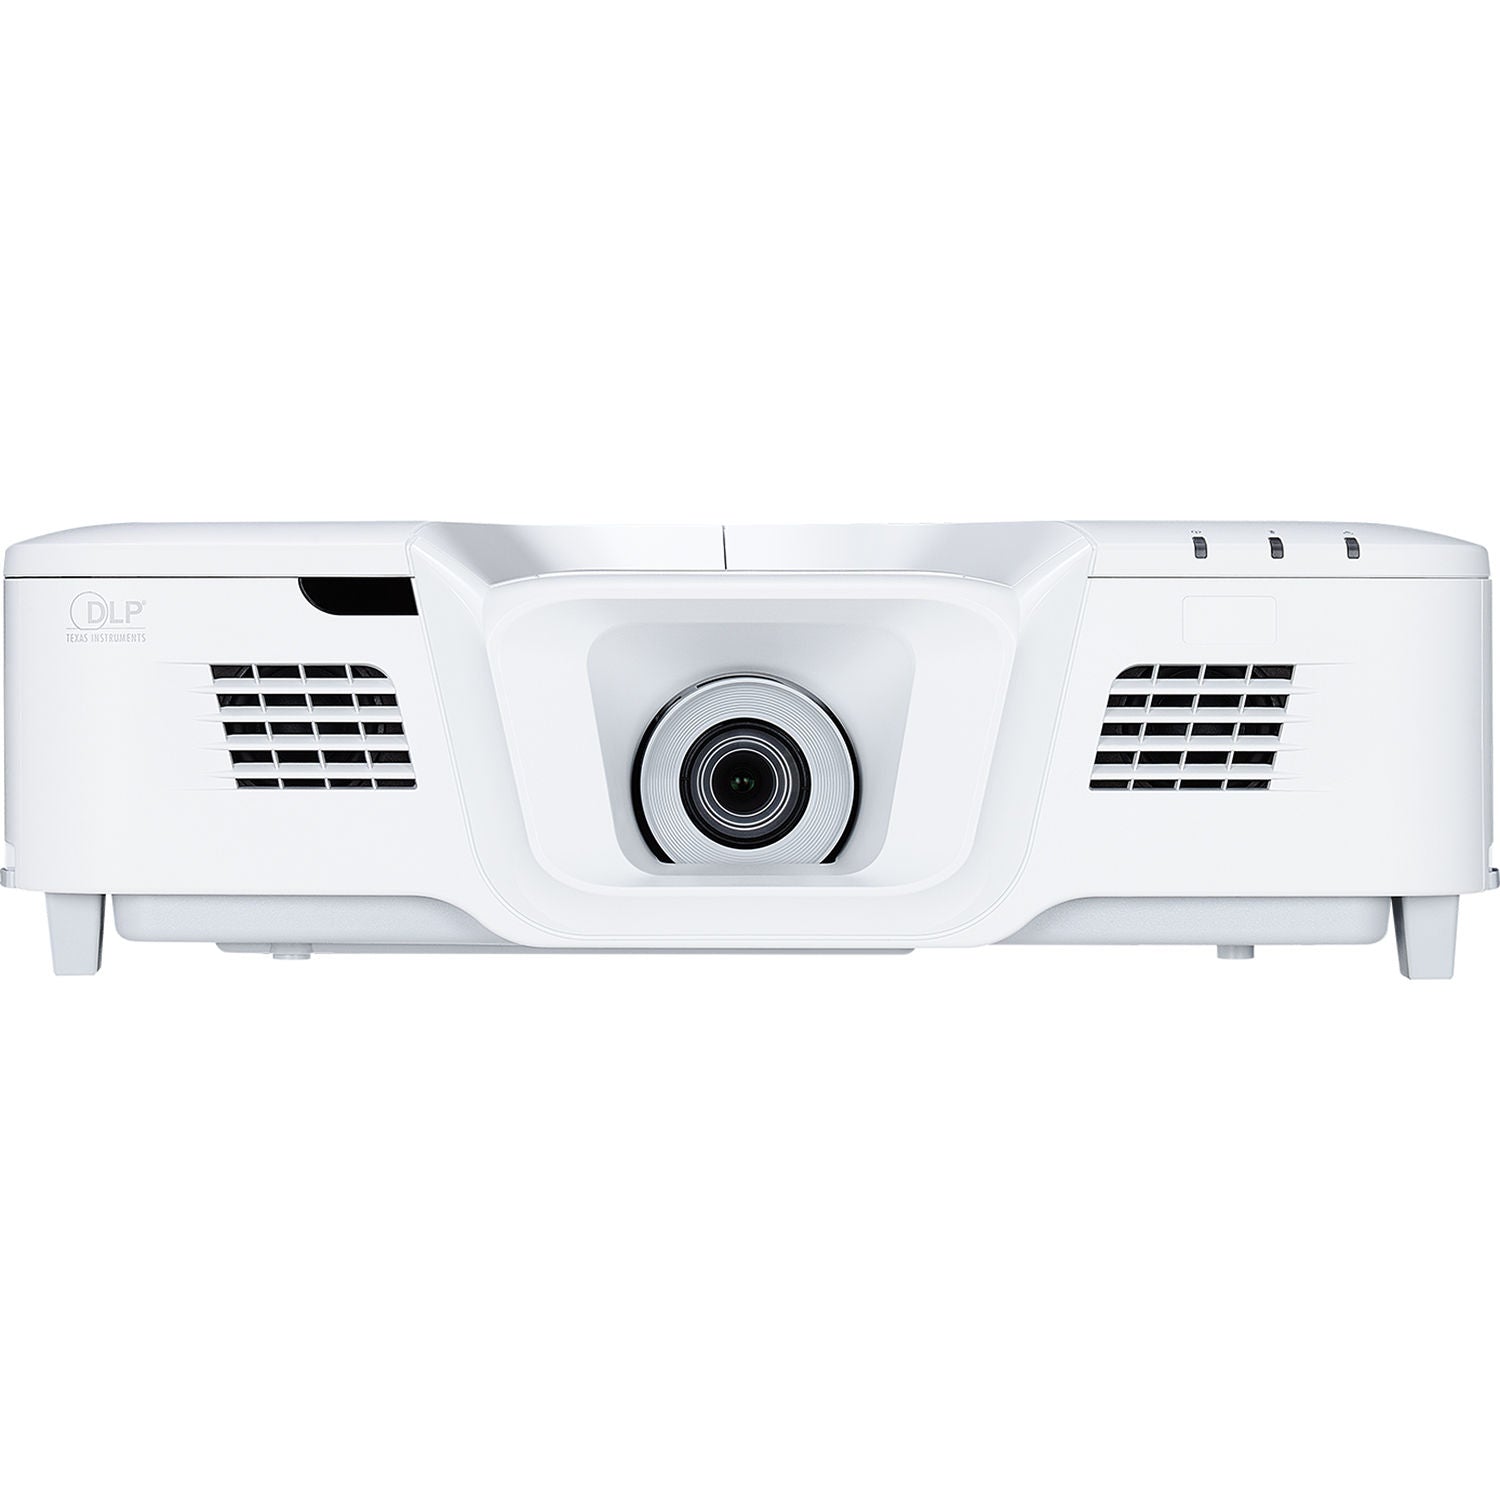 ViewSonic PG800HD-S 5000 Lumens WXGA HDMI Networkable Projector with Lens Shift - Certified Refurbished